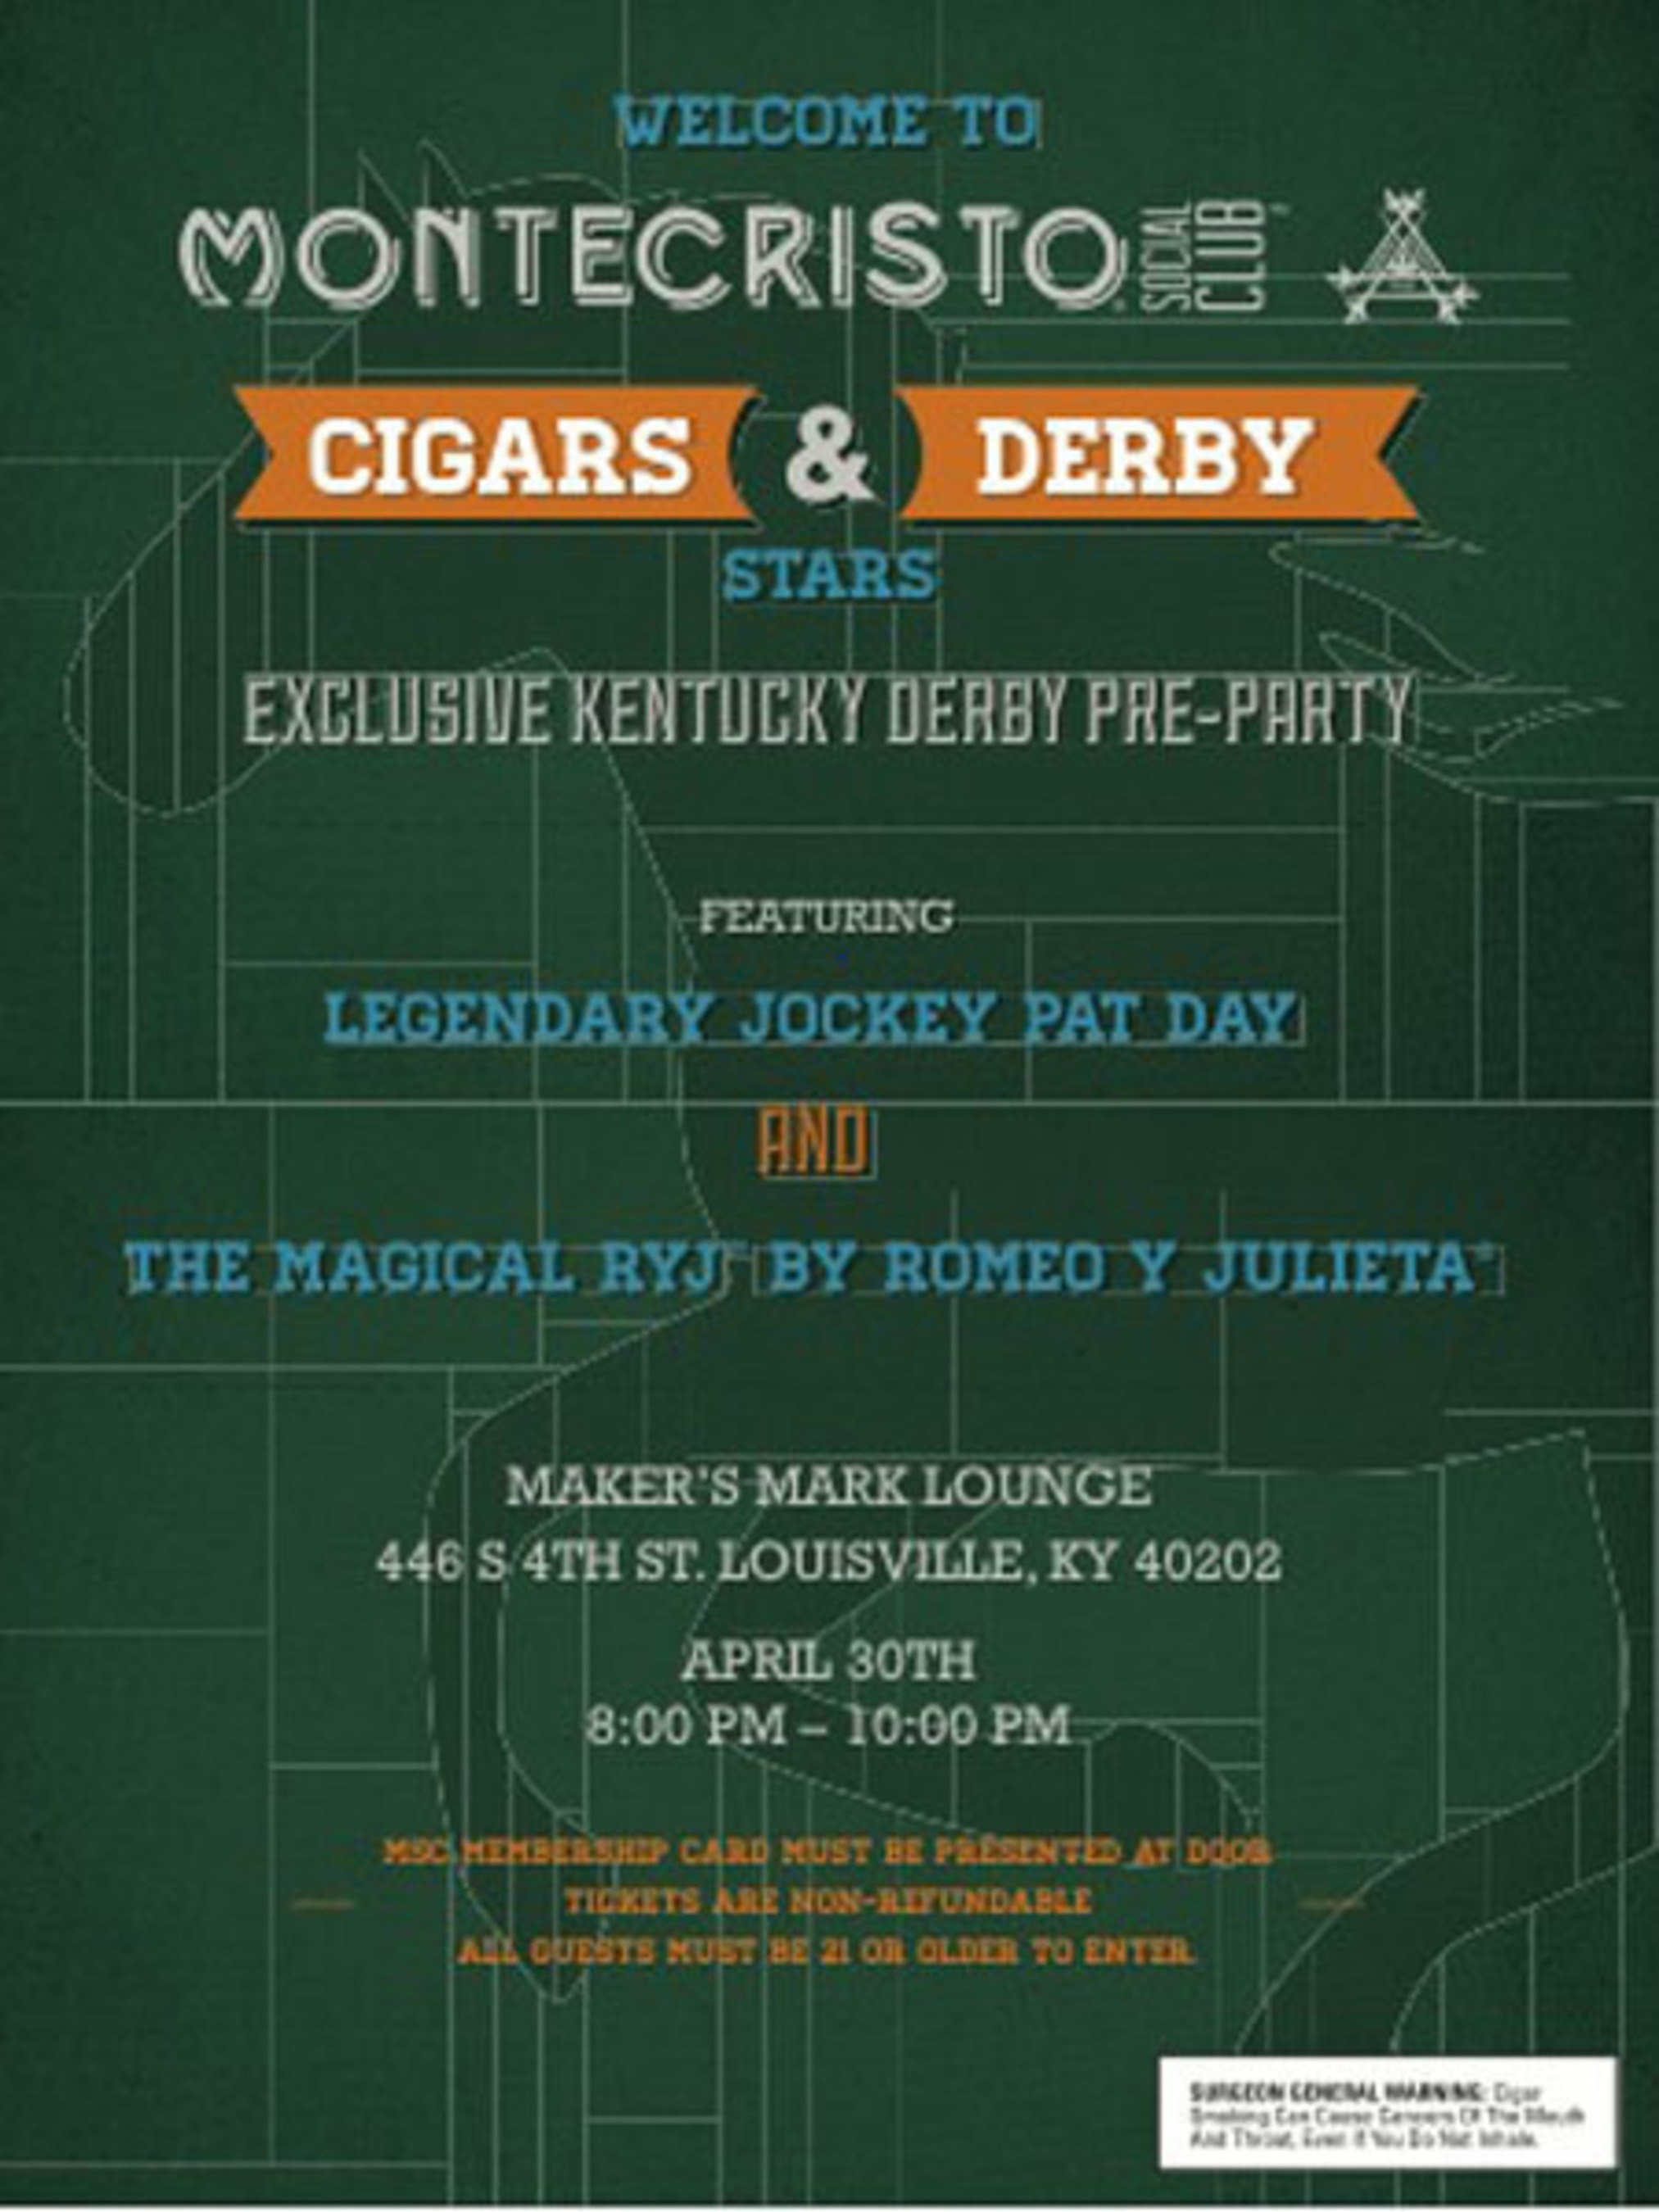 Montecristo Social Club Celebrates the Good Life with the "Cigars and Derby Stars" Kentucky Derby Pre-Party (PRNewsFoto/Montecristo Social Club)